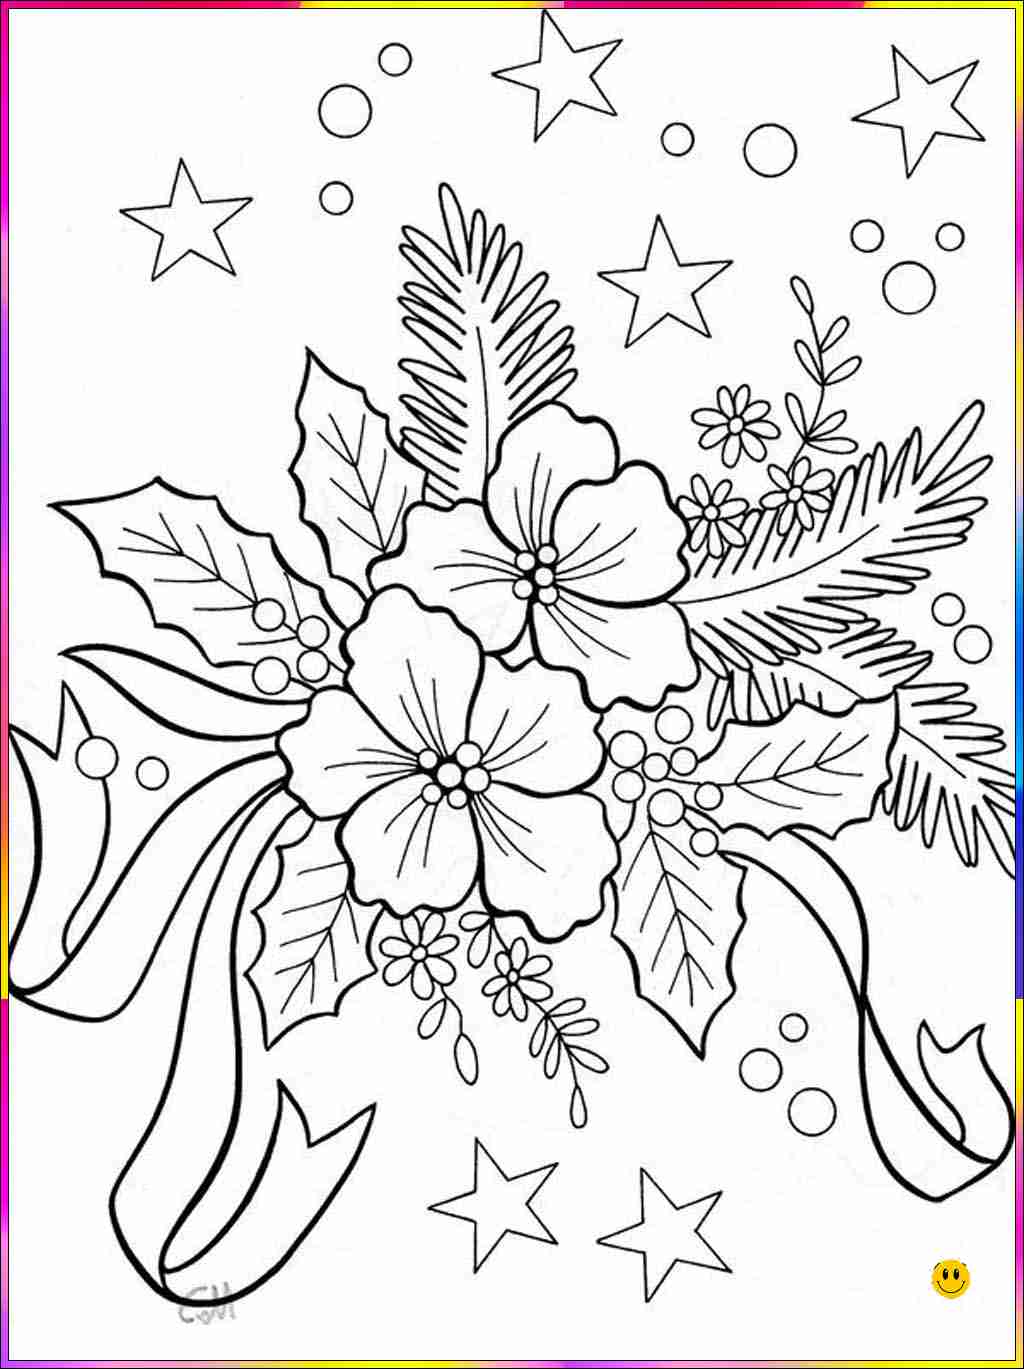 flower drawing for coloring
